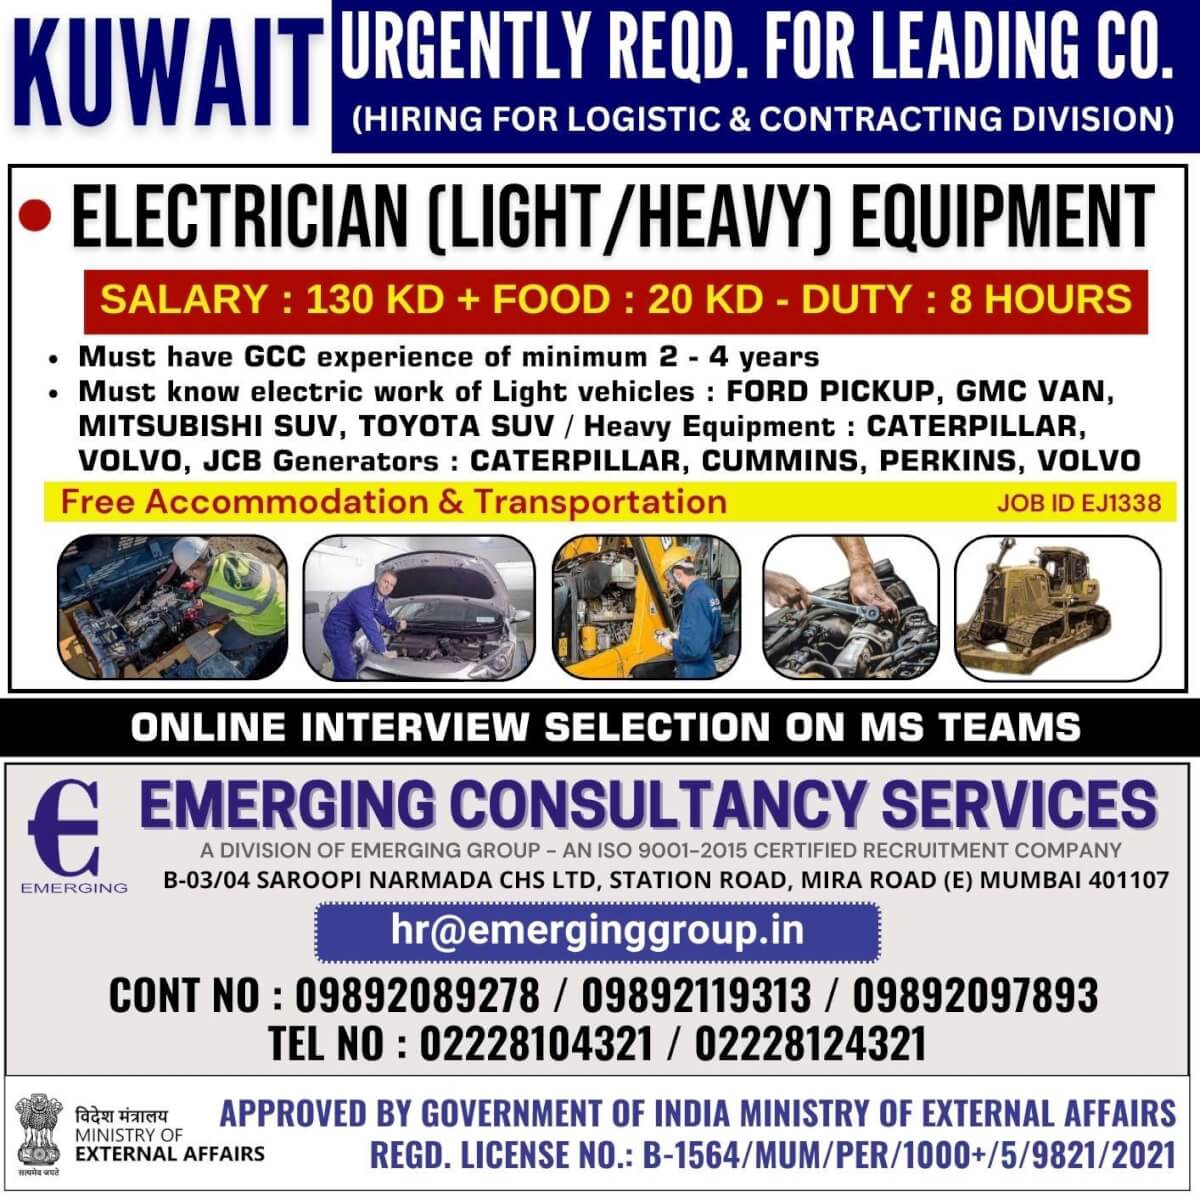 URGENTLY REQD. FOR LEADING CO. IN KUWAIT - LOGISTIC & CONTRACTING DIVISION